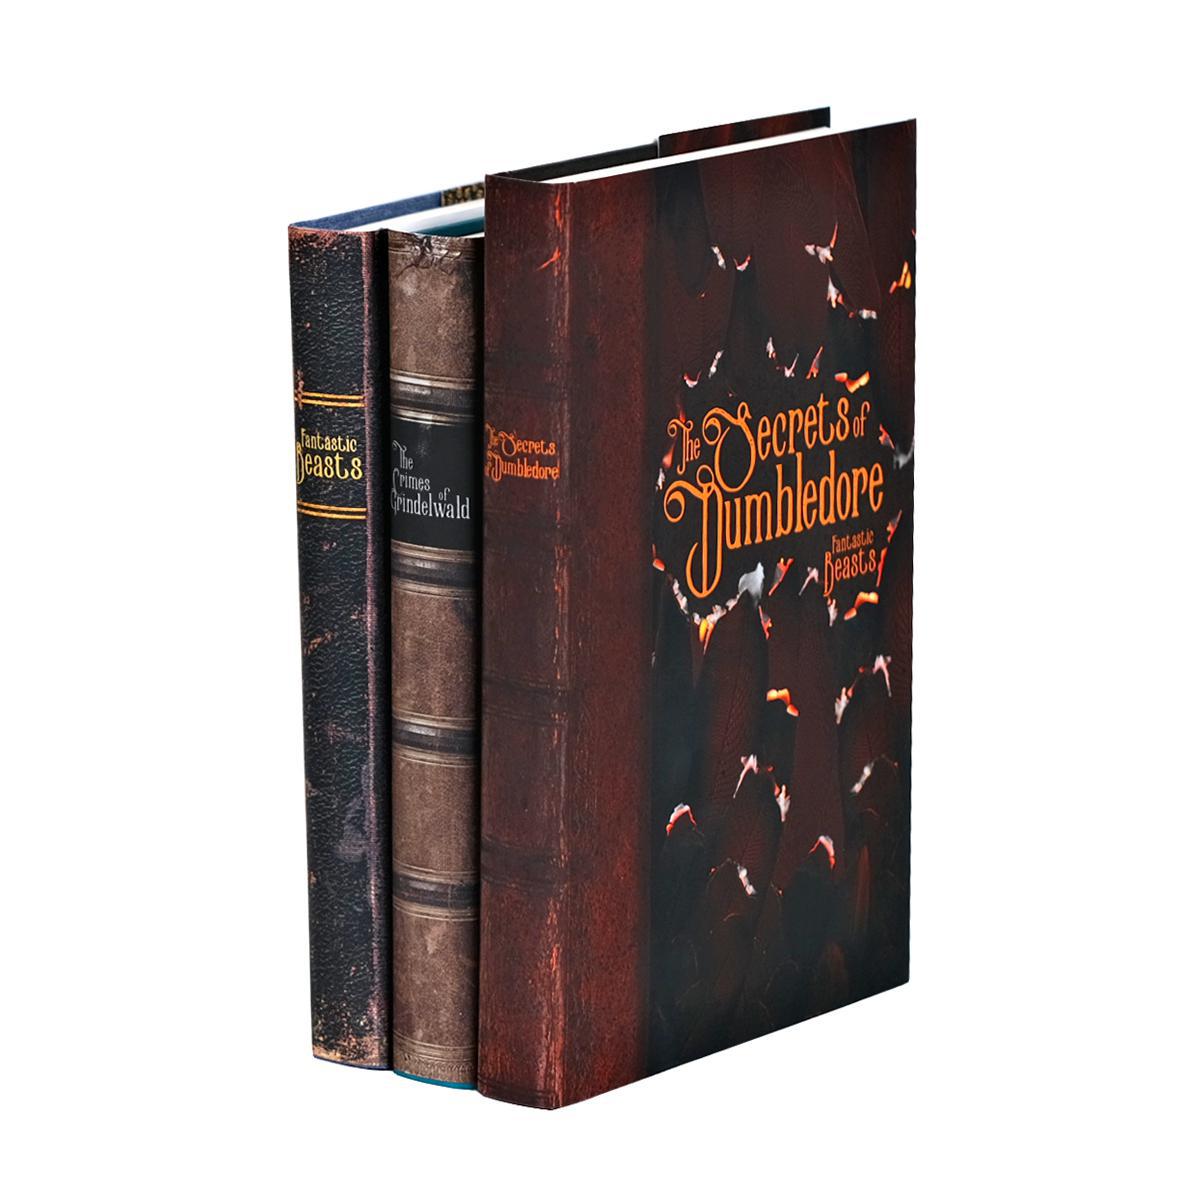 Juniper Books - Fantastic Beasts and Where to Find Them - Original screenplay Set - 2 Volume Hardcover Book Set with Custom Book Covers